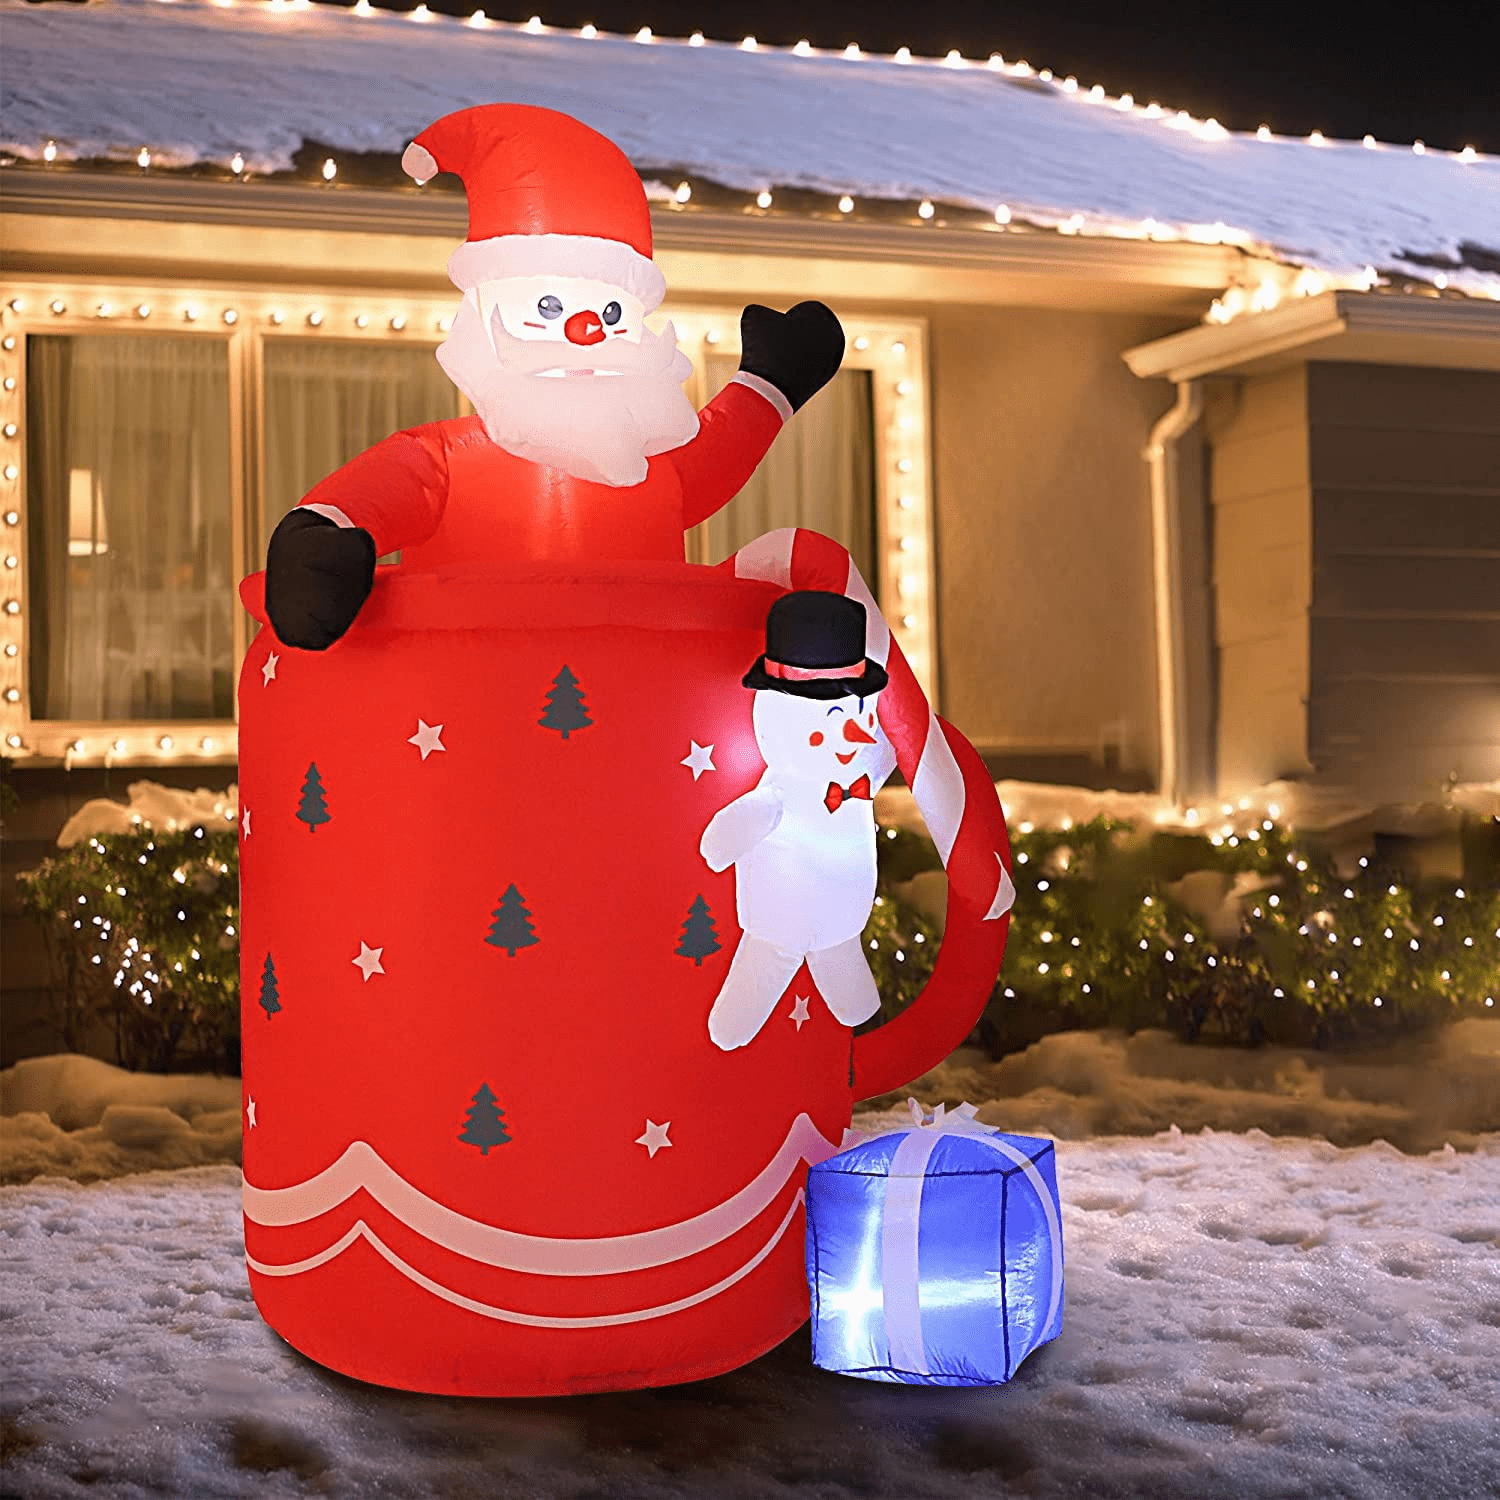 6 FT Christmas Inflatables Outdoor Decorations Santa Claus Cup with  Snowman, Christmas Blow Up Yard Decorations with Built-In LED Lights, for  Outdoor